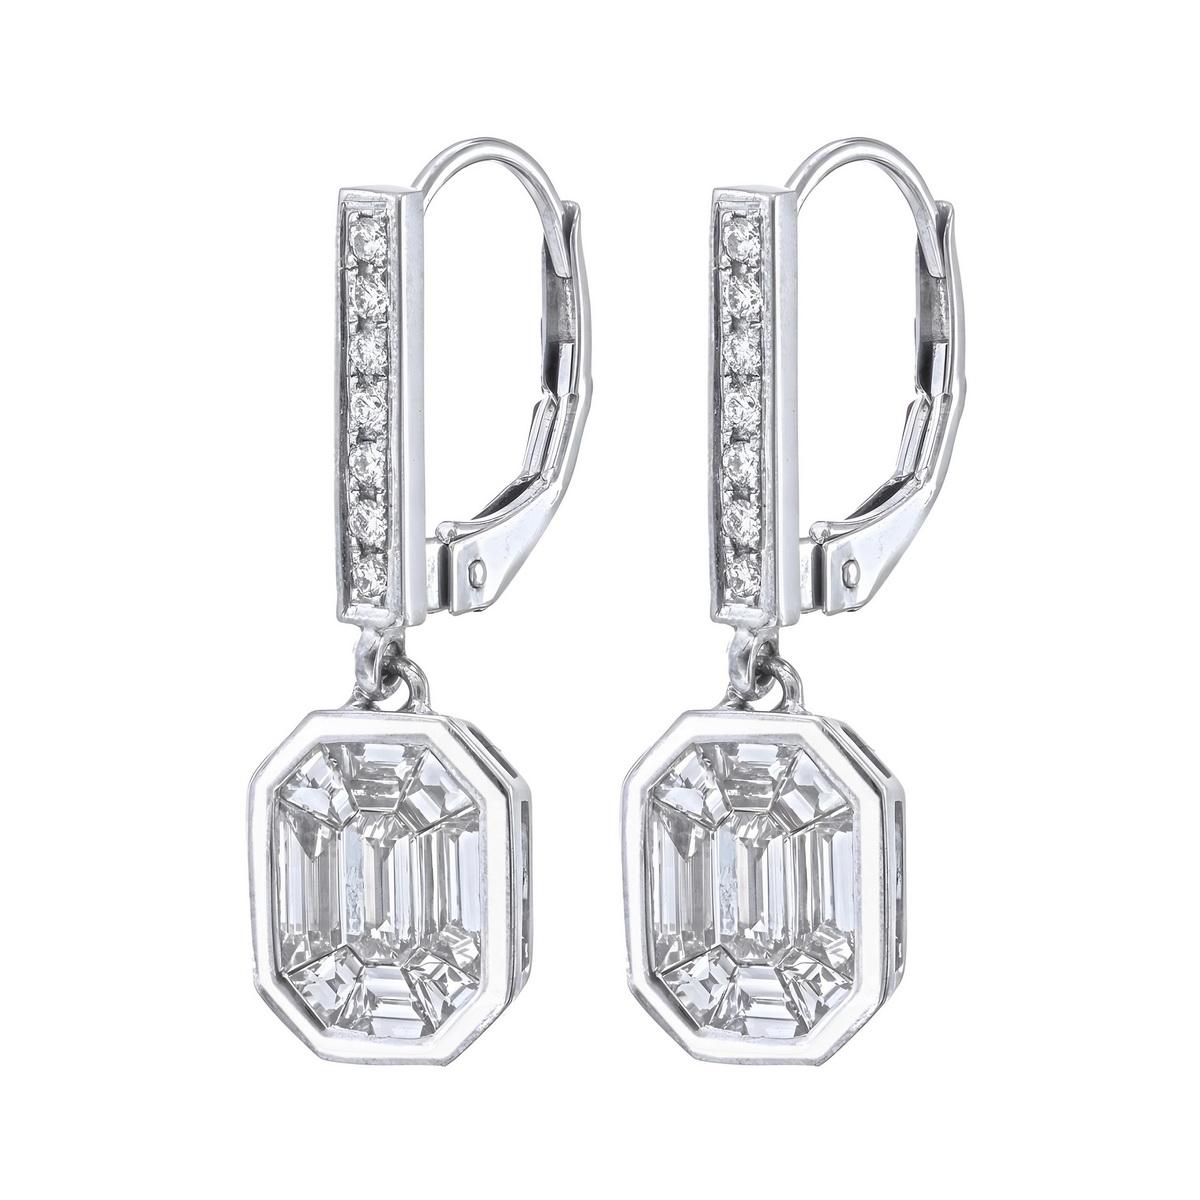 French lever back earrings with 2 carat face up Invisible set diamond earrings For Sale